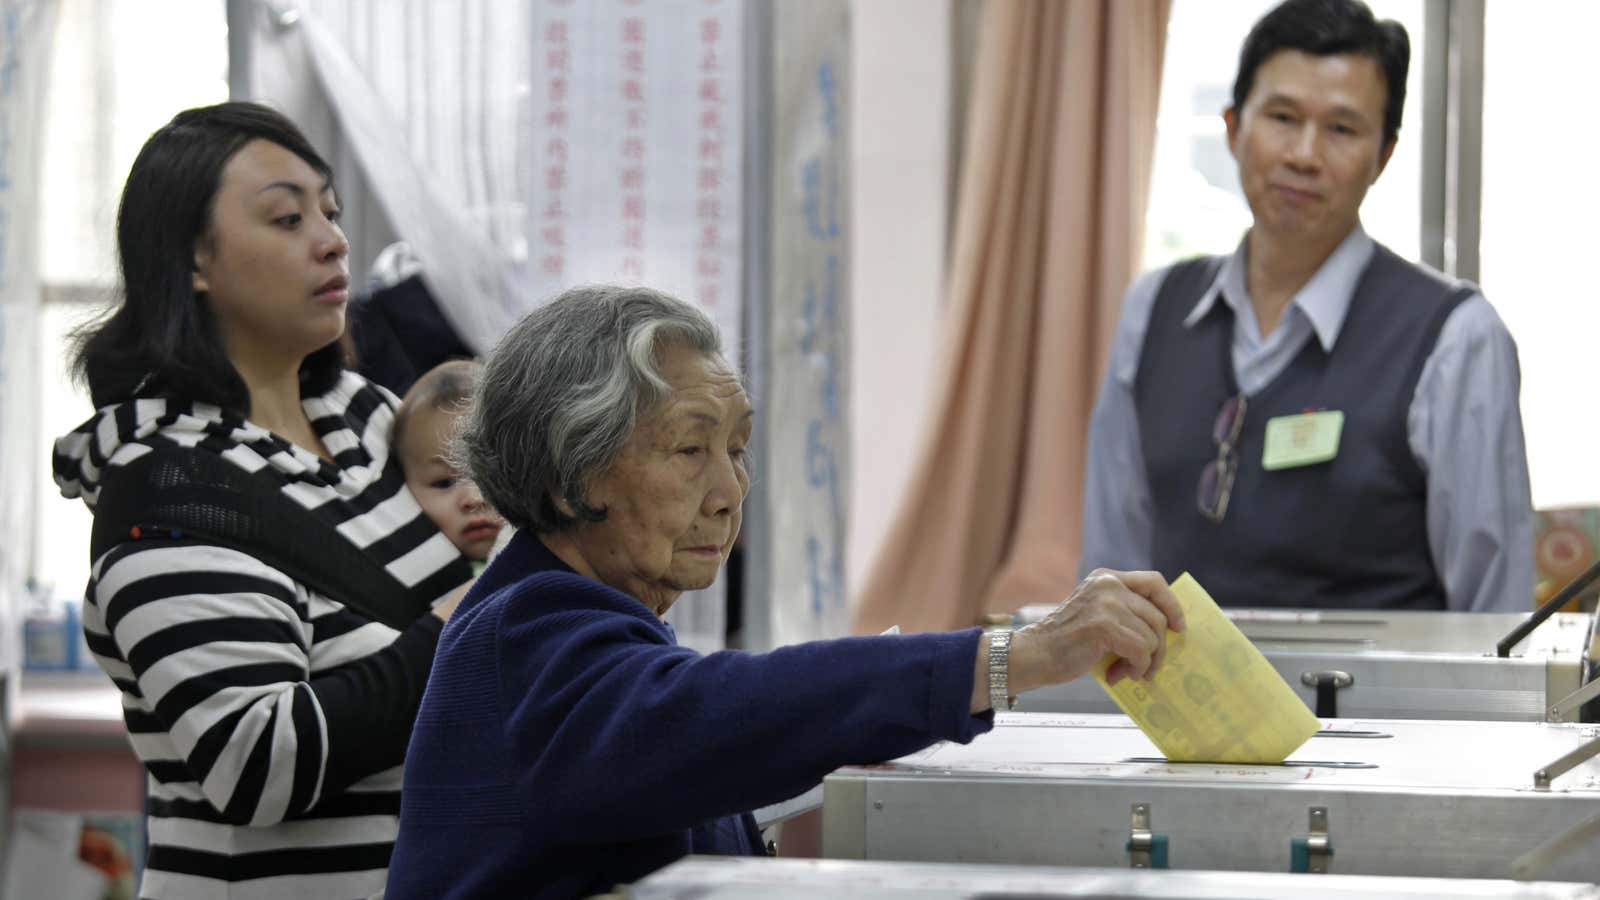 Taiwan’s democracy, seen here in action, is likely why its society is more equal than China.